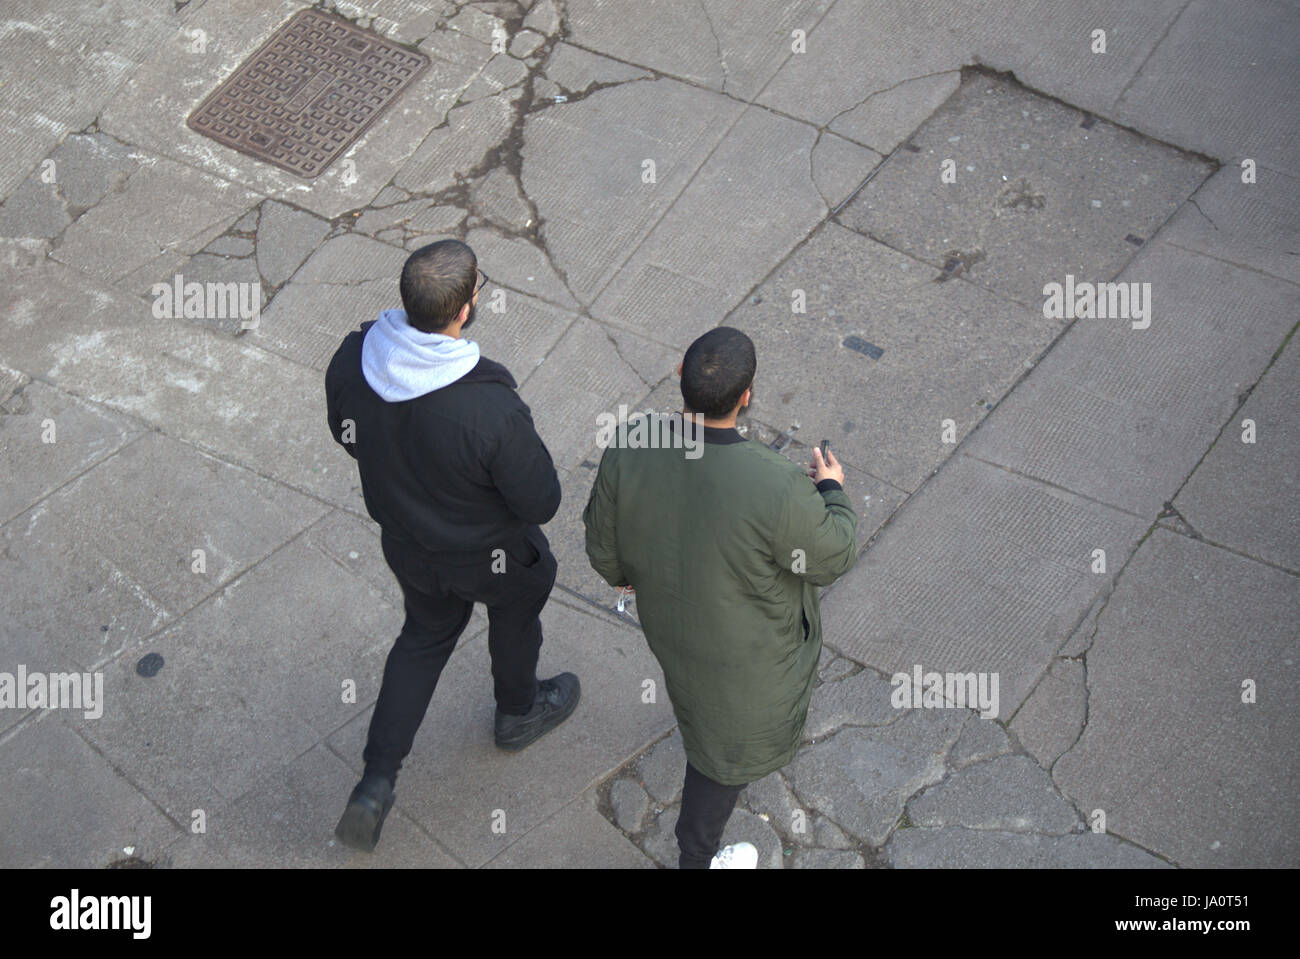 two young Asian or Arab men males walking on cracked concrete pavement Stock Photo